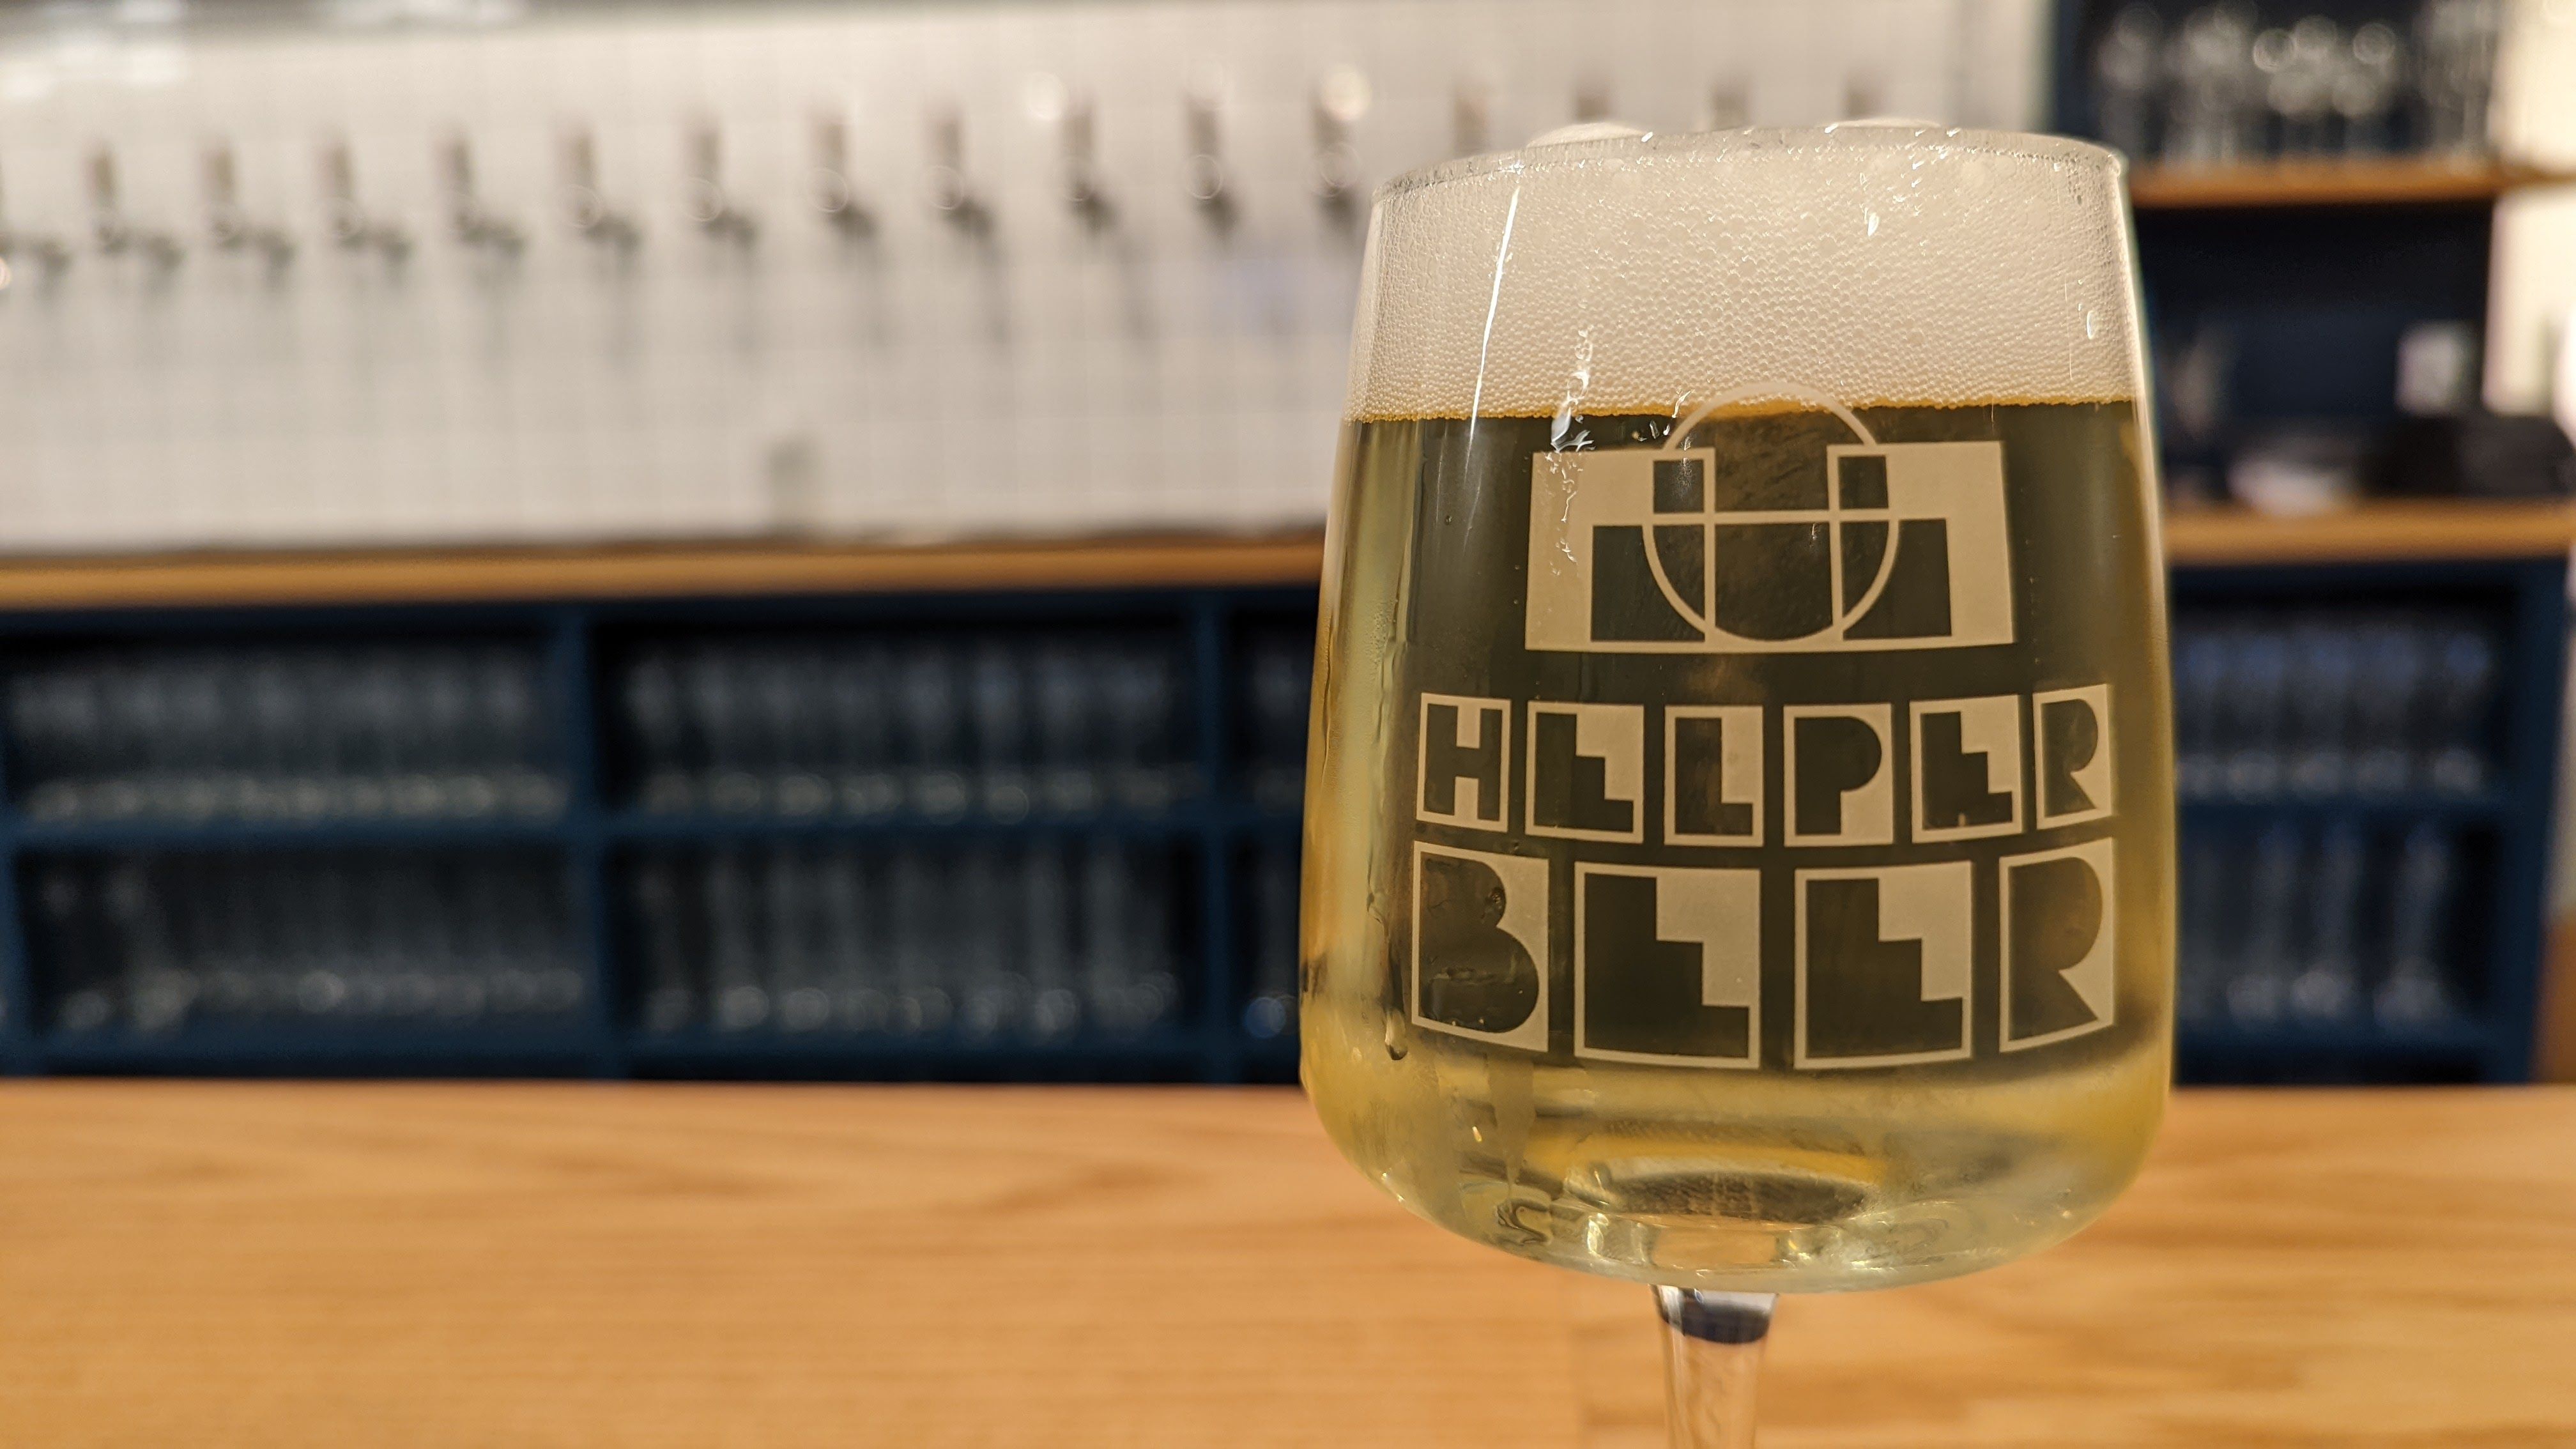 A glass of beer, etched with a logo that reads "Helper Beer"